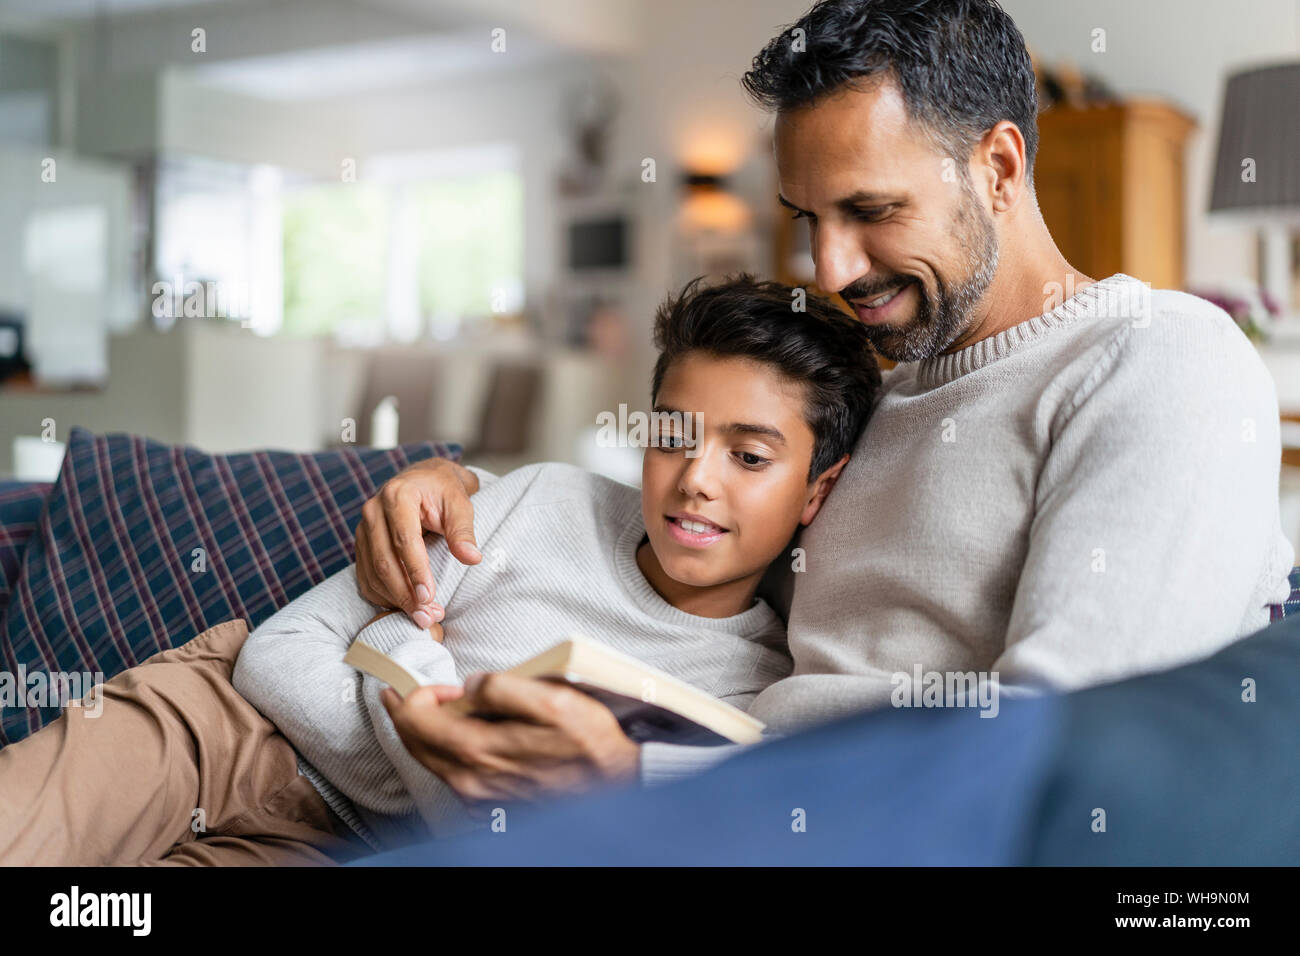 Father lying with son on couch in living room reading book Stock Photo